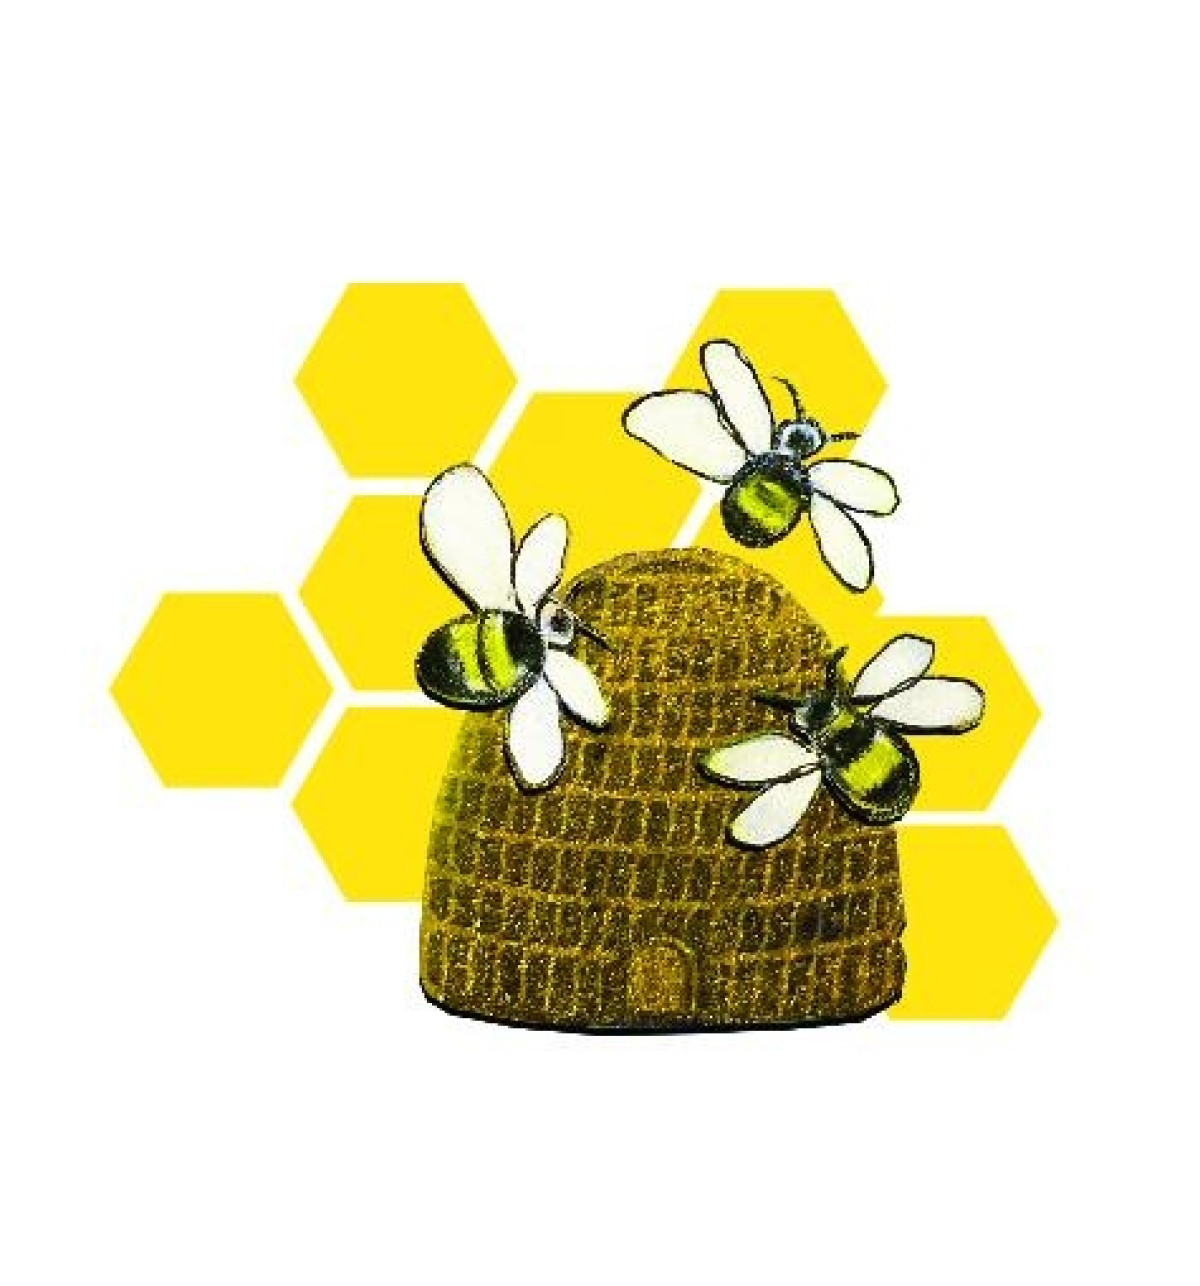 Welcome The Pollinators Foundation